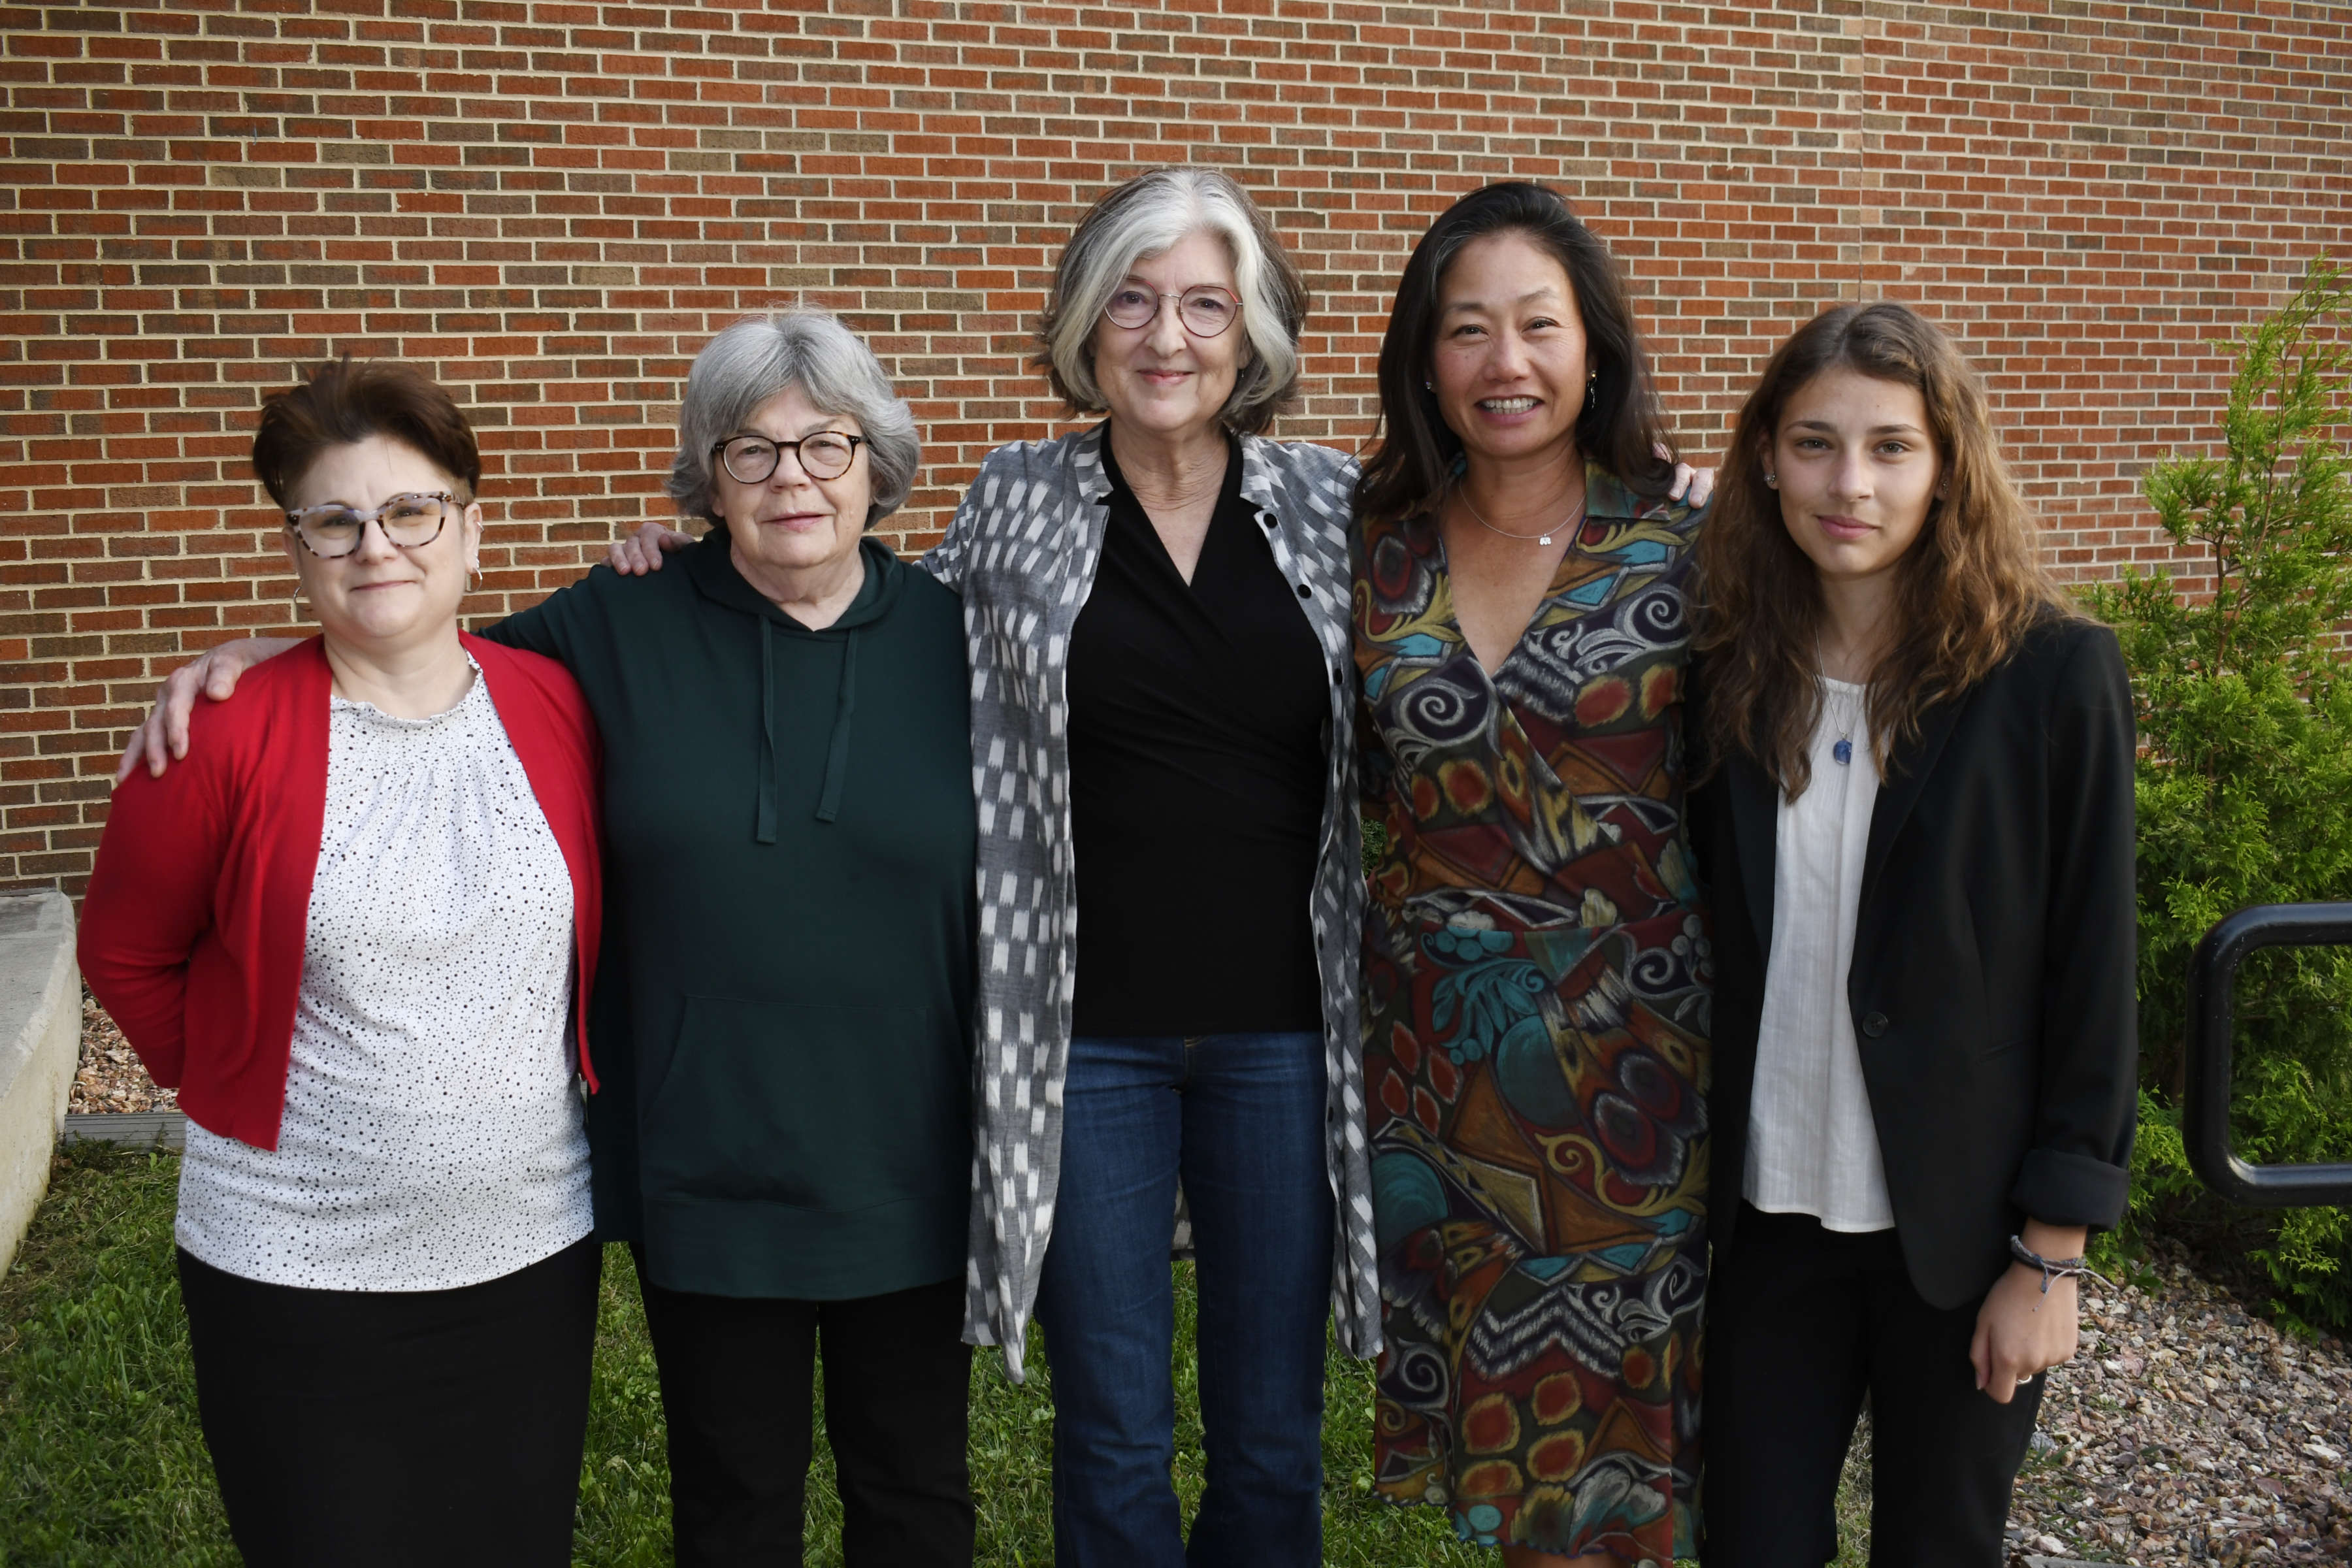 Photo of writer Barbara Kingsolver with winners of fiction competition standing in front of a brick wall.